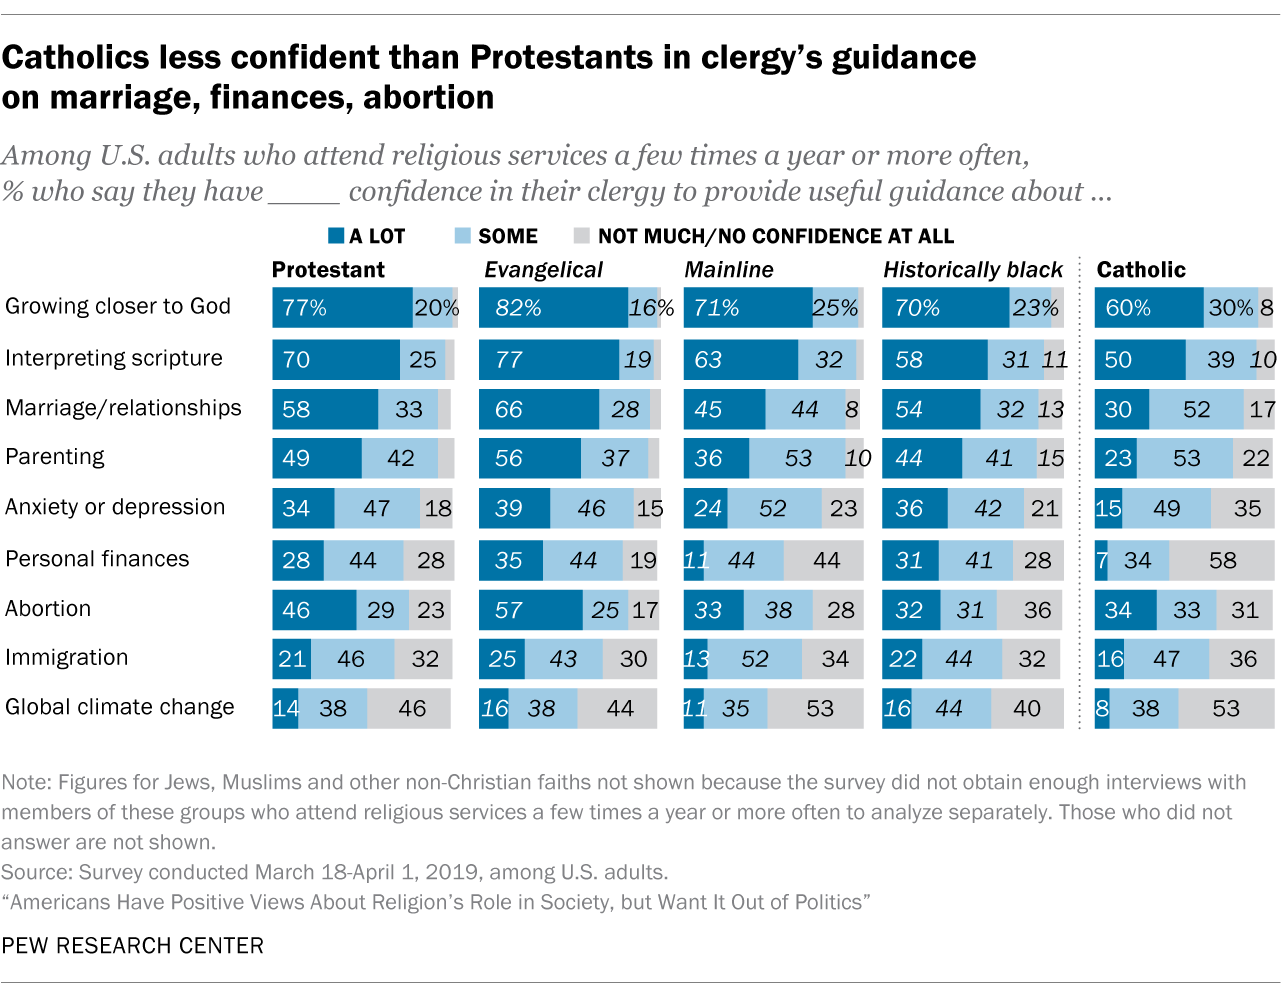 Catholics less confident than Protestants in clergy's guidance on marriage, finances, abortion